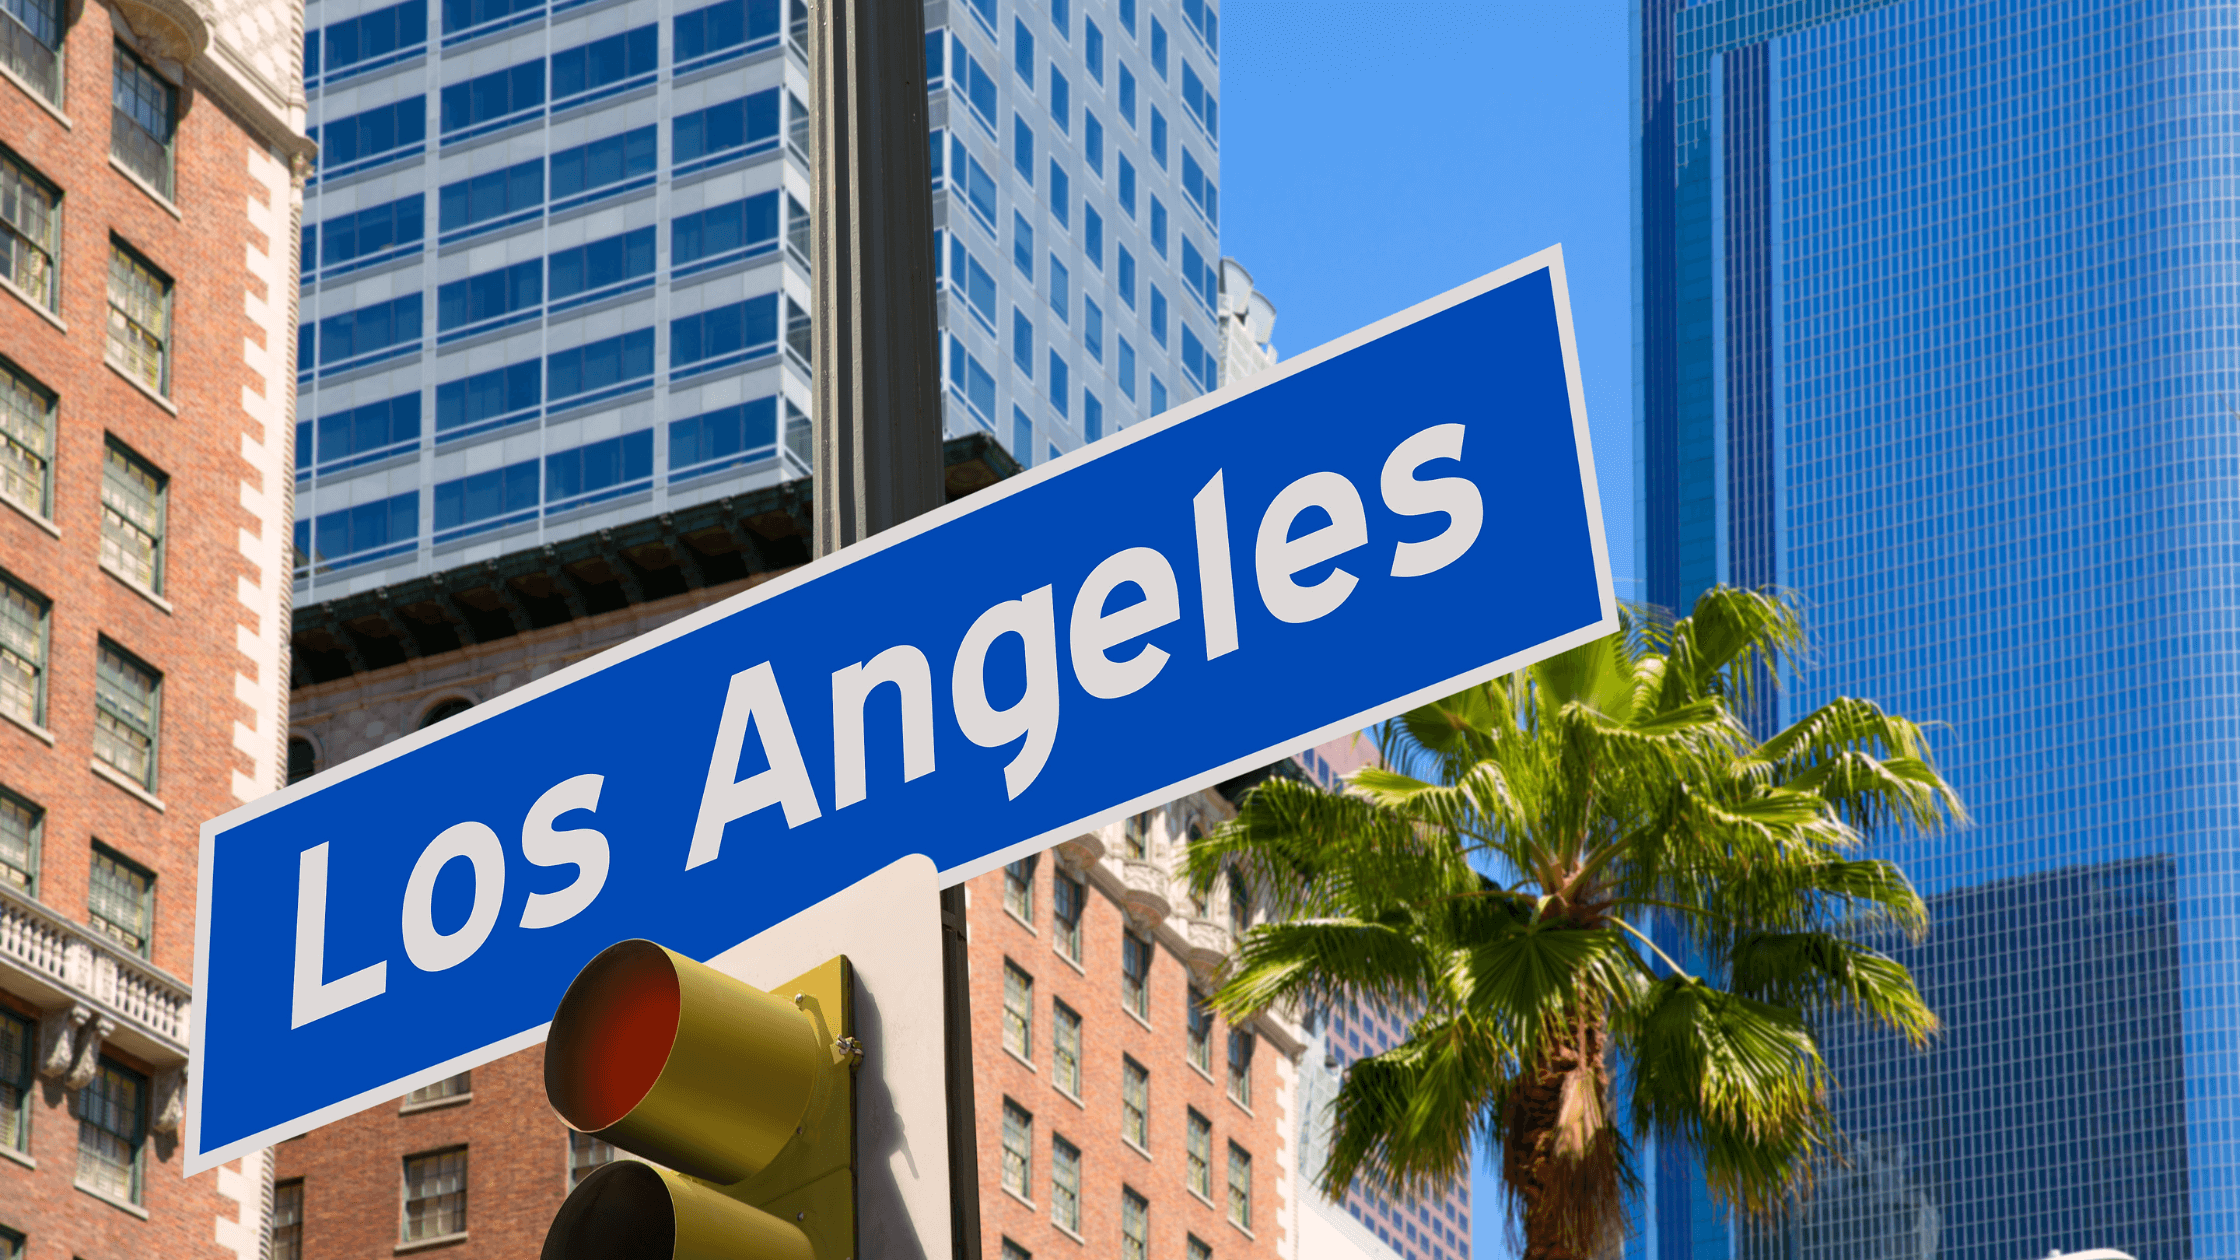 Los Angeles street sign "sell your Buick in Los Angeles